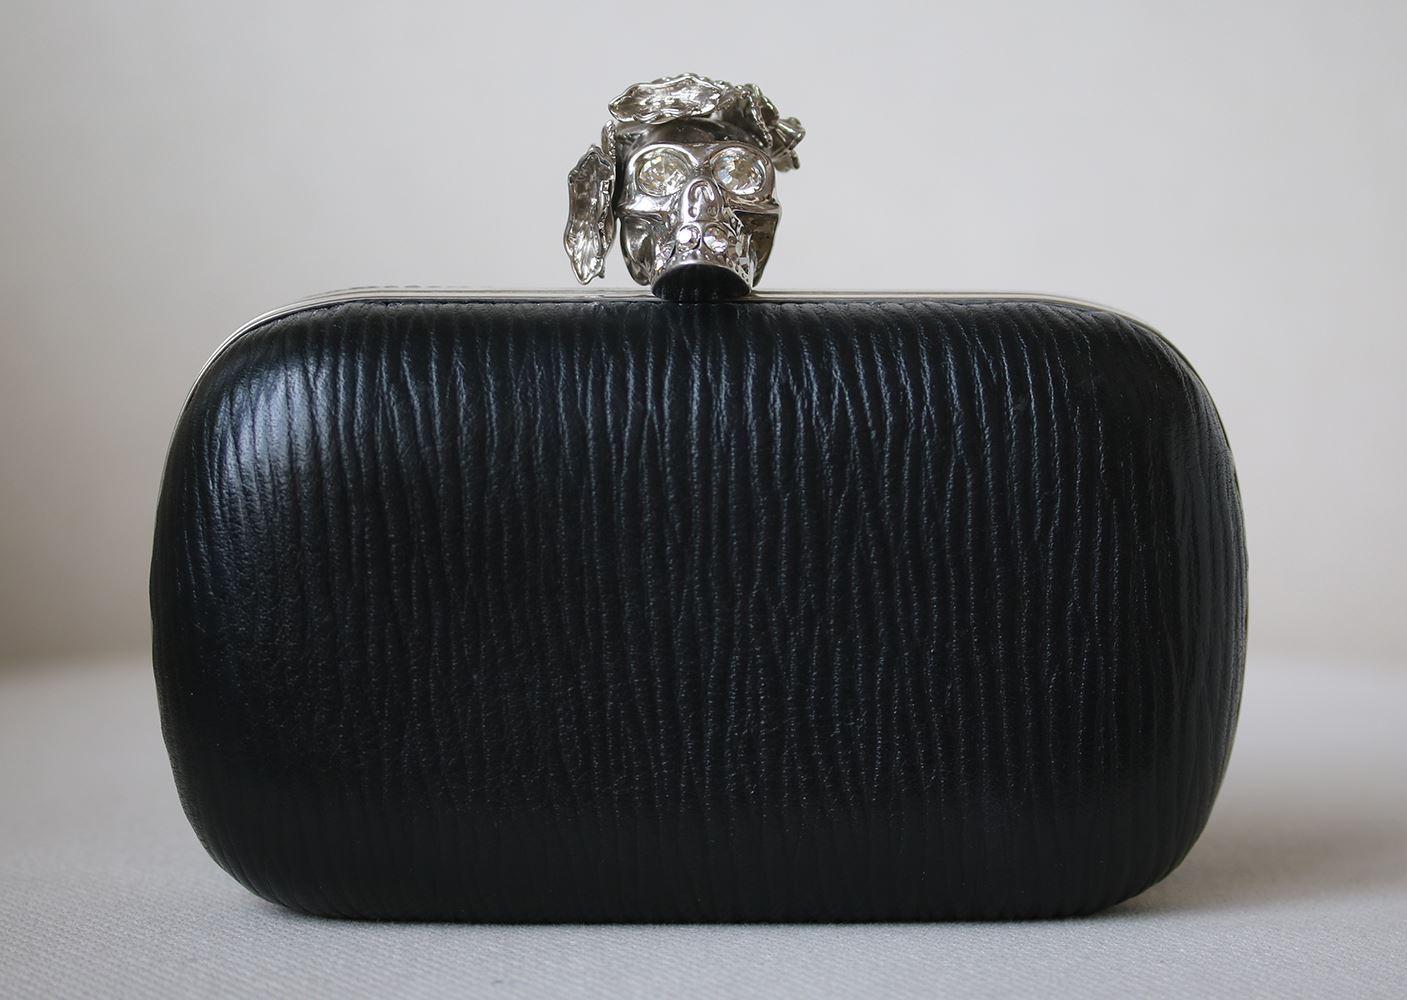 Make a statement with this bold Alexander McQueen black textured leather poppy skull box clutch bag. Featuring box frame silhouette, this clutch is covered in gorgeous black grained leather. The clutch closes with a silver-tone metal and Poppy